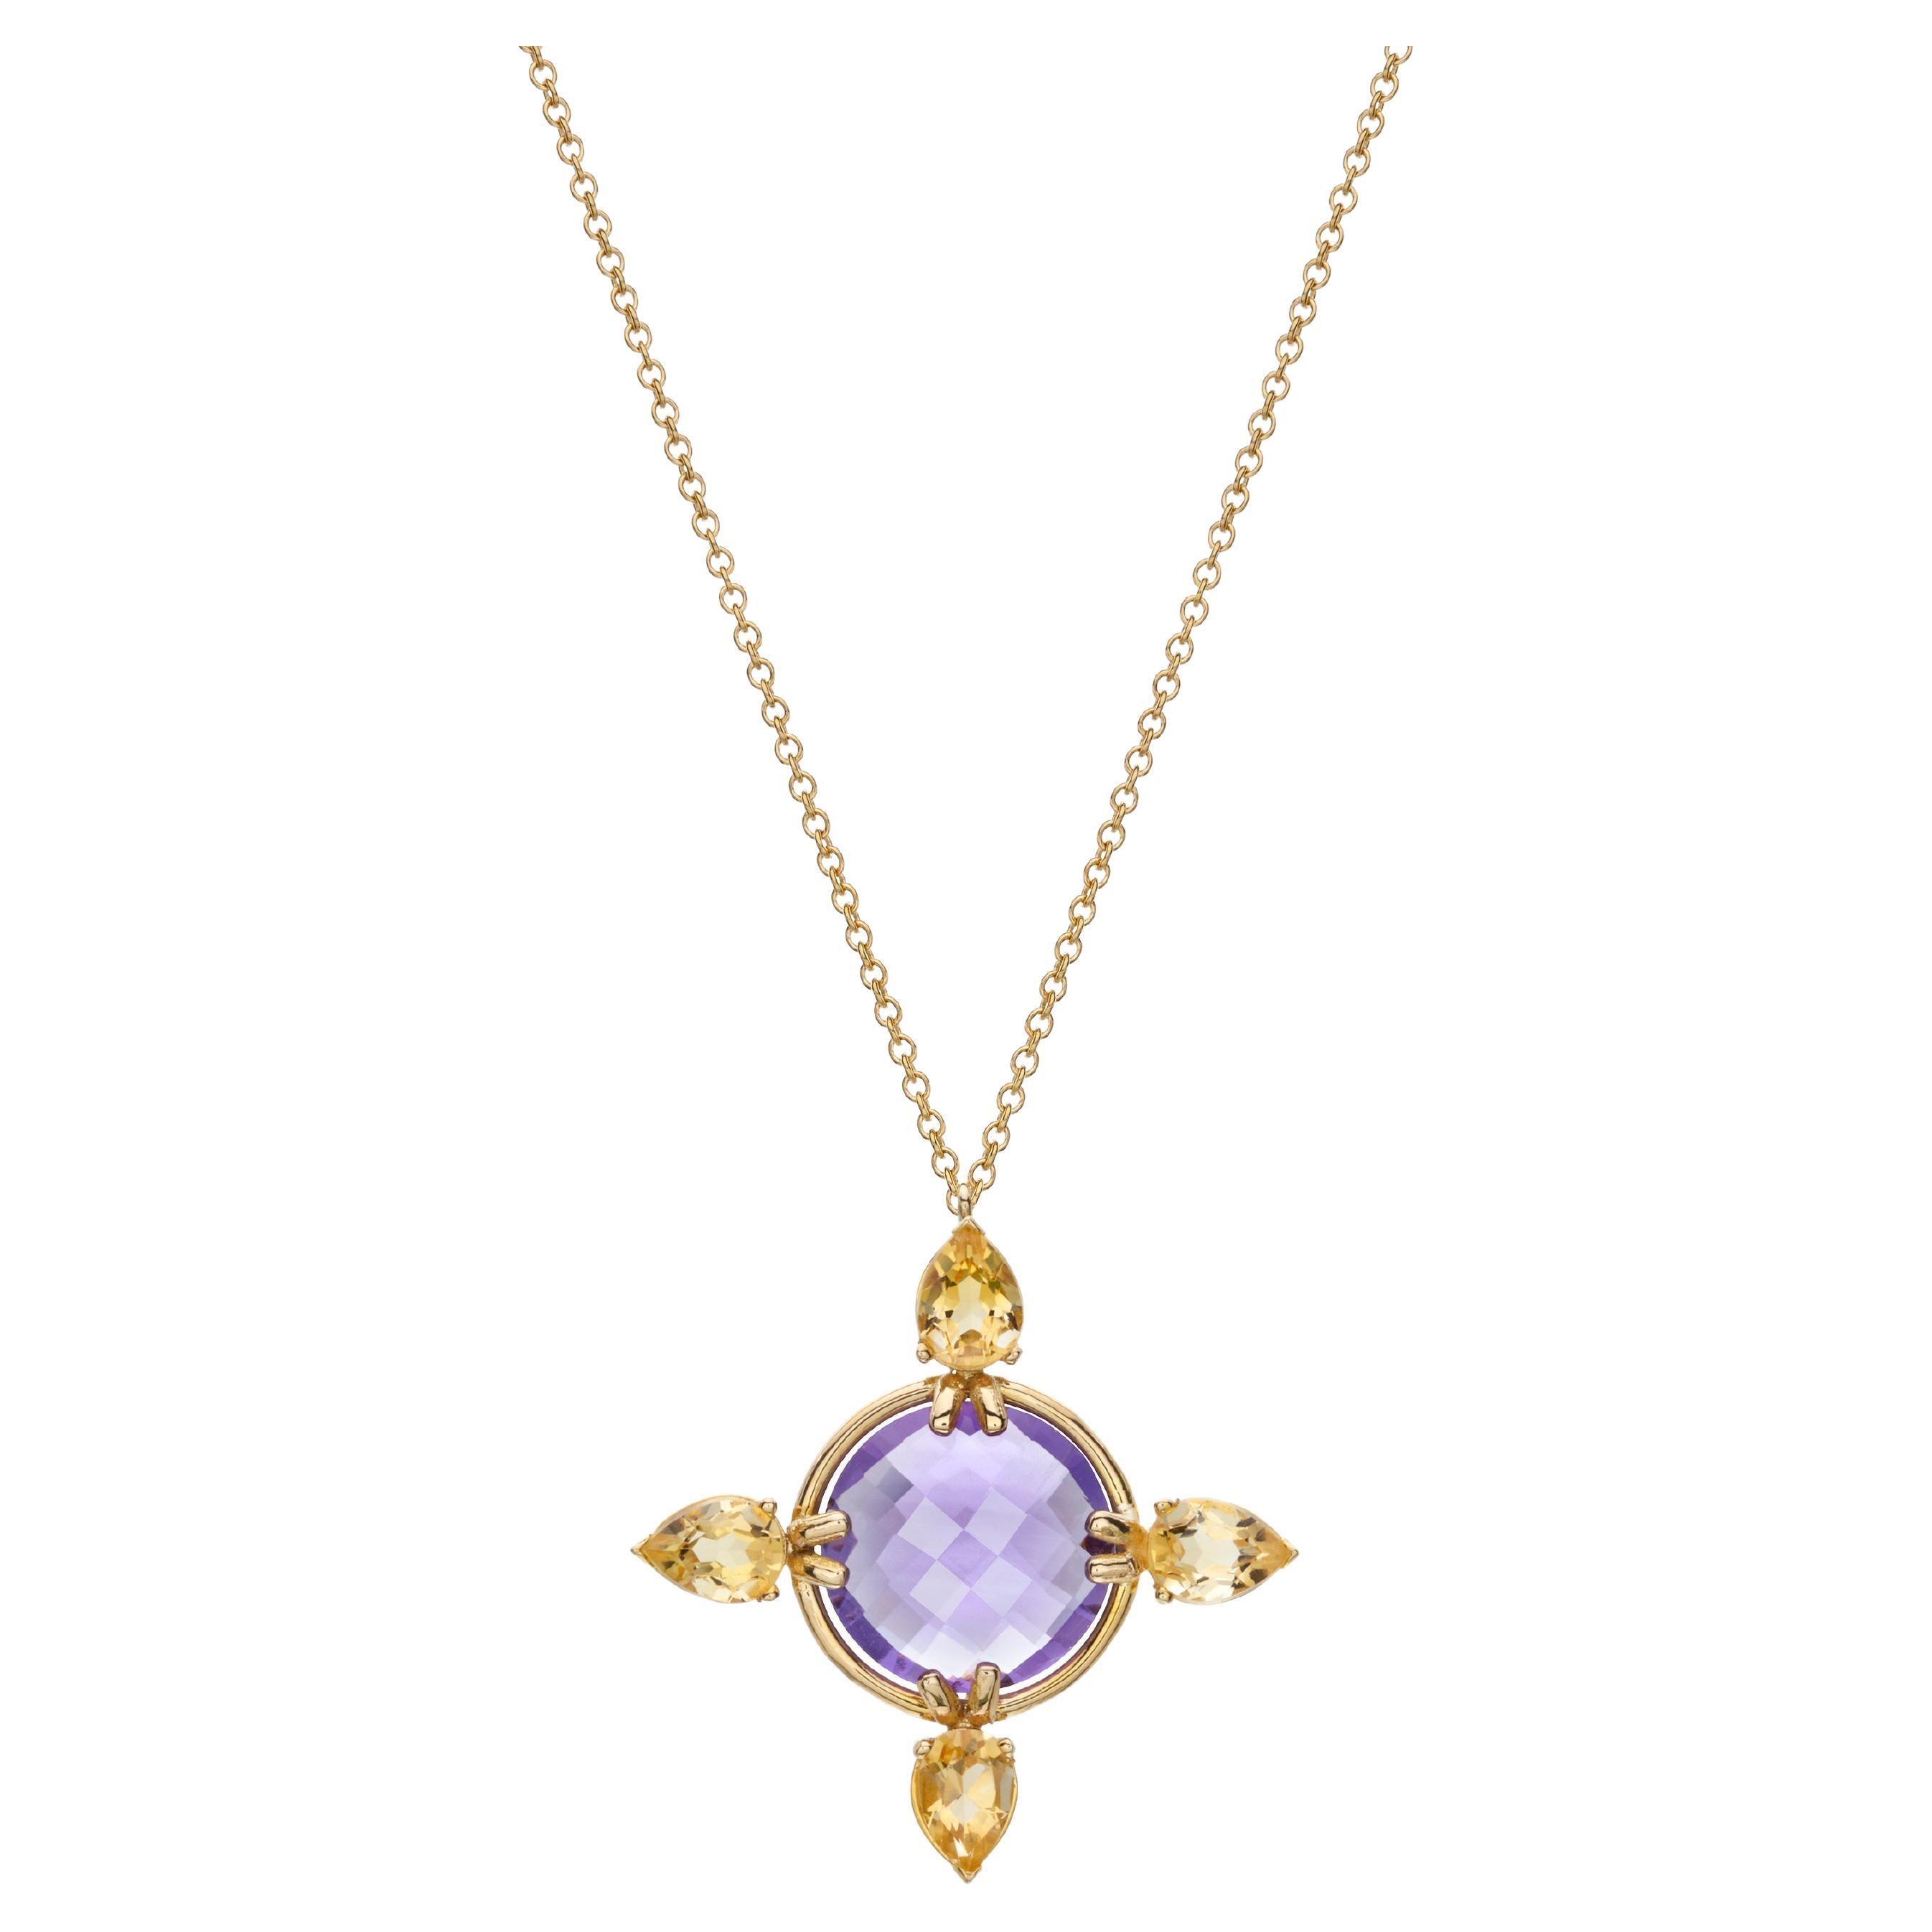 18Kt Gold Pendant Necklace with a Rose Cut Amethyst and Pear Citrine Cross Shape For Sale